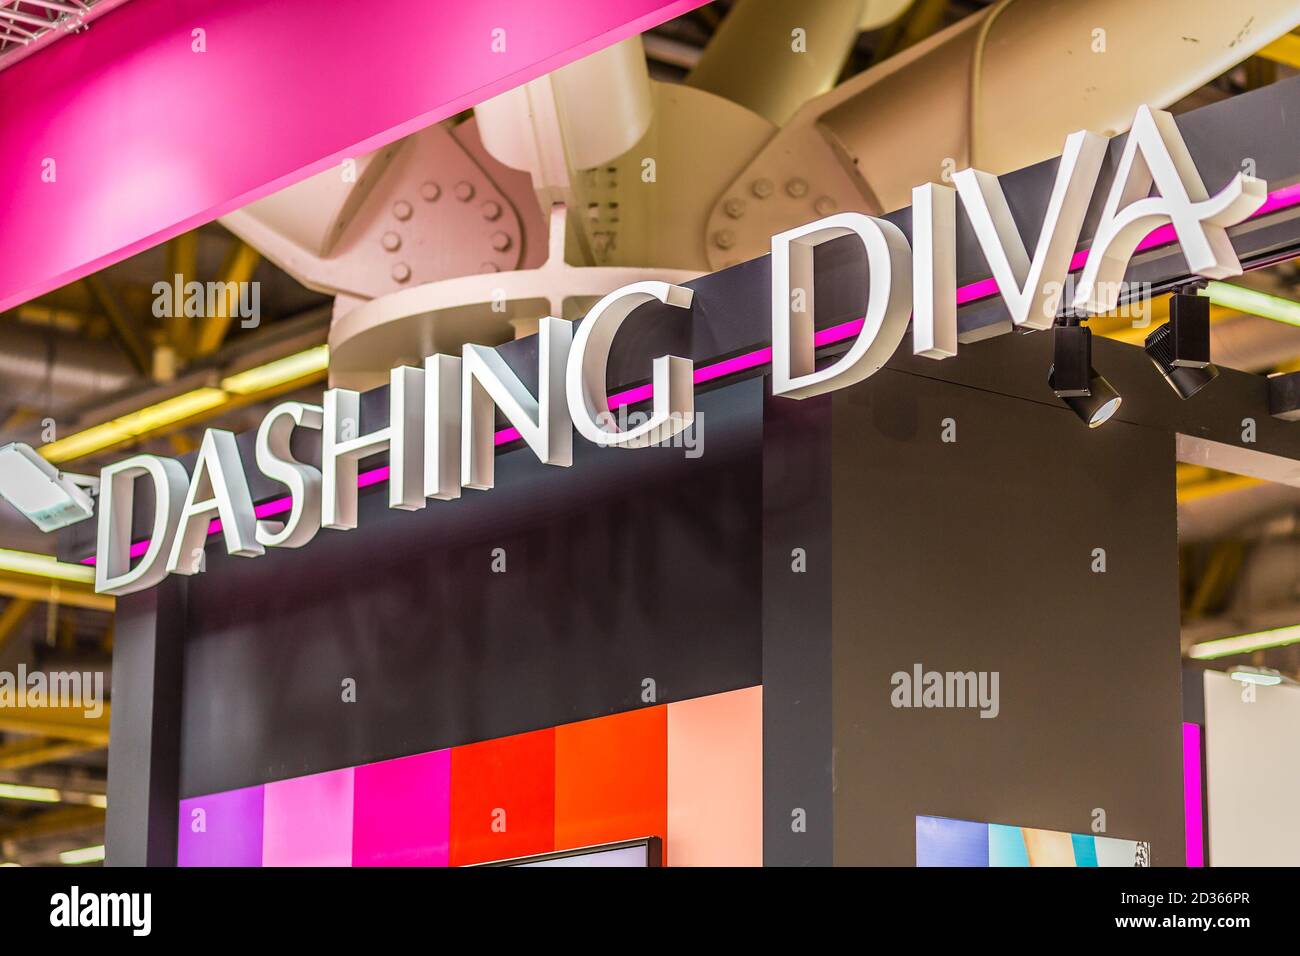 BOLOGNA (BO), ITALY - MARCH 14, 2019: light is enlightening DASHING DIVA brand logo at COSMOPROF, trade show of the beauty industry Stock Photo